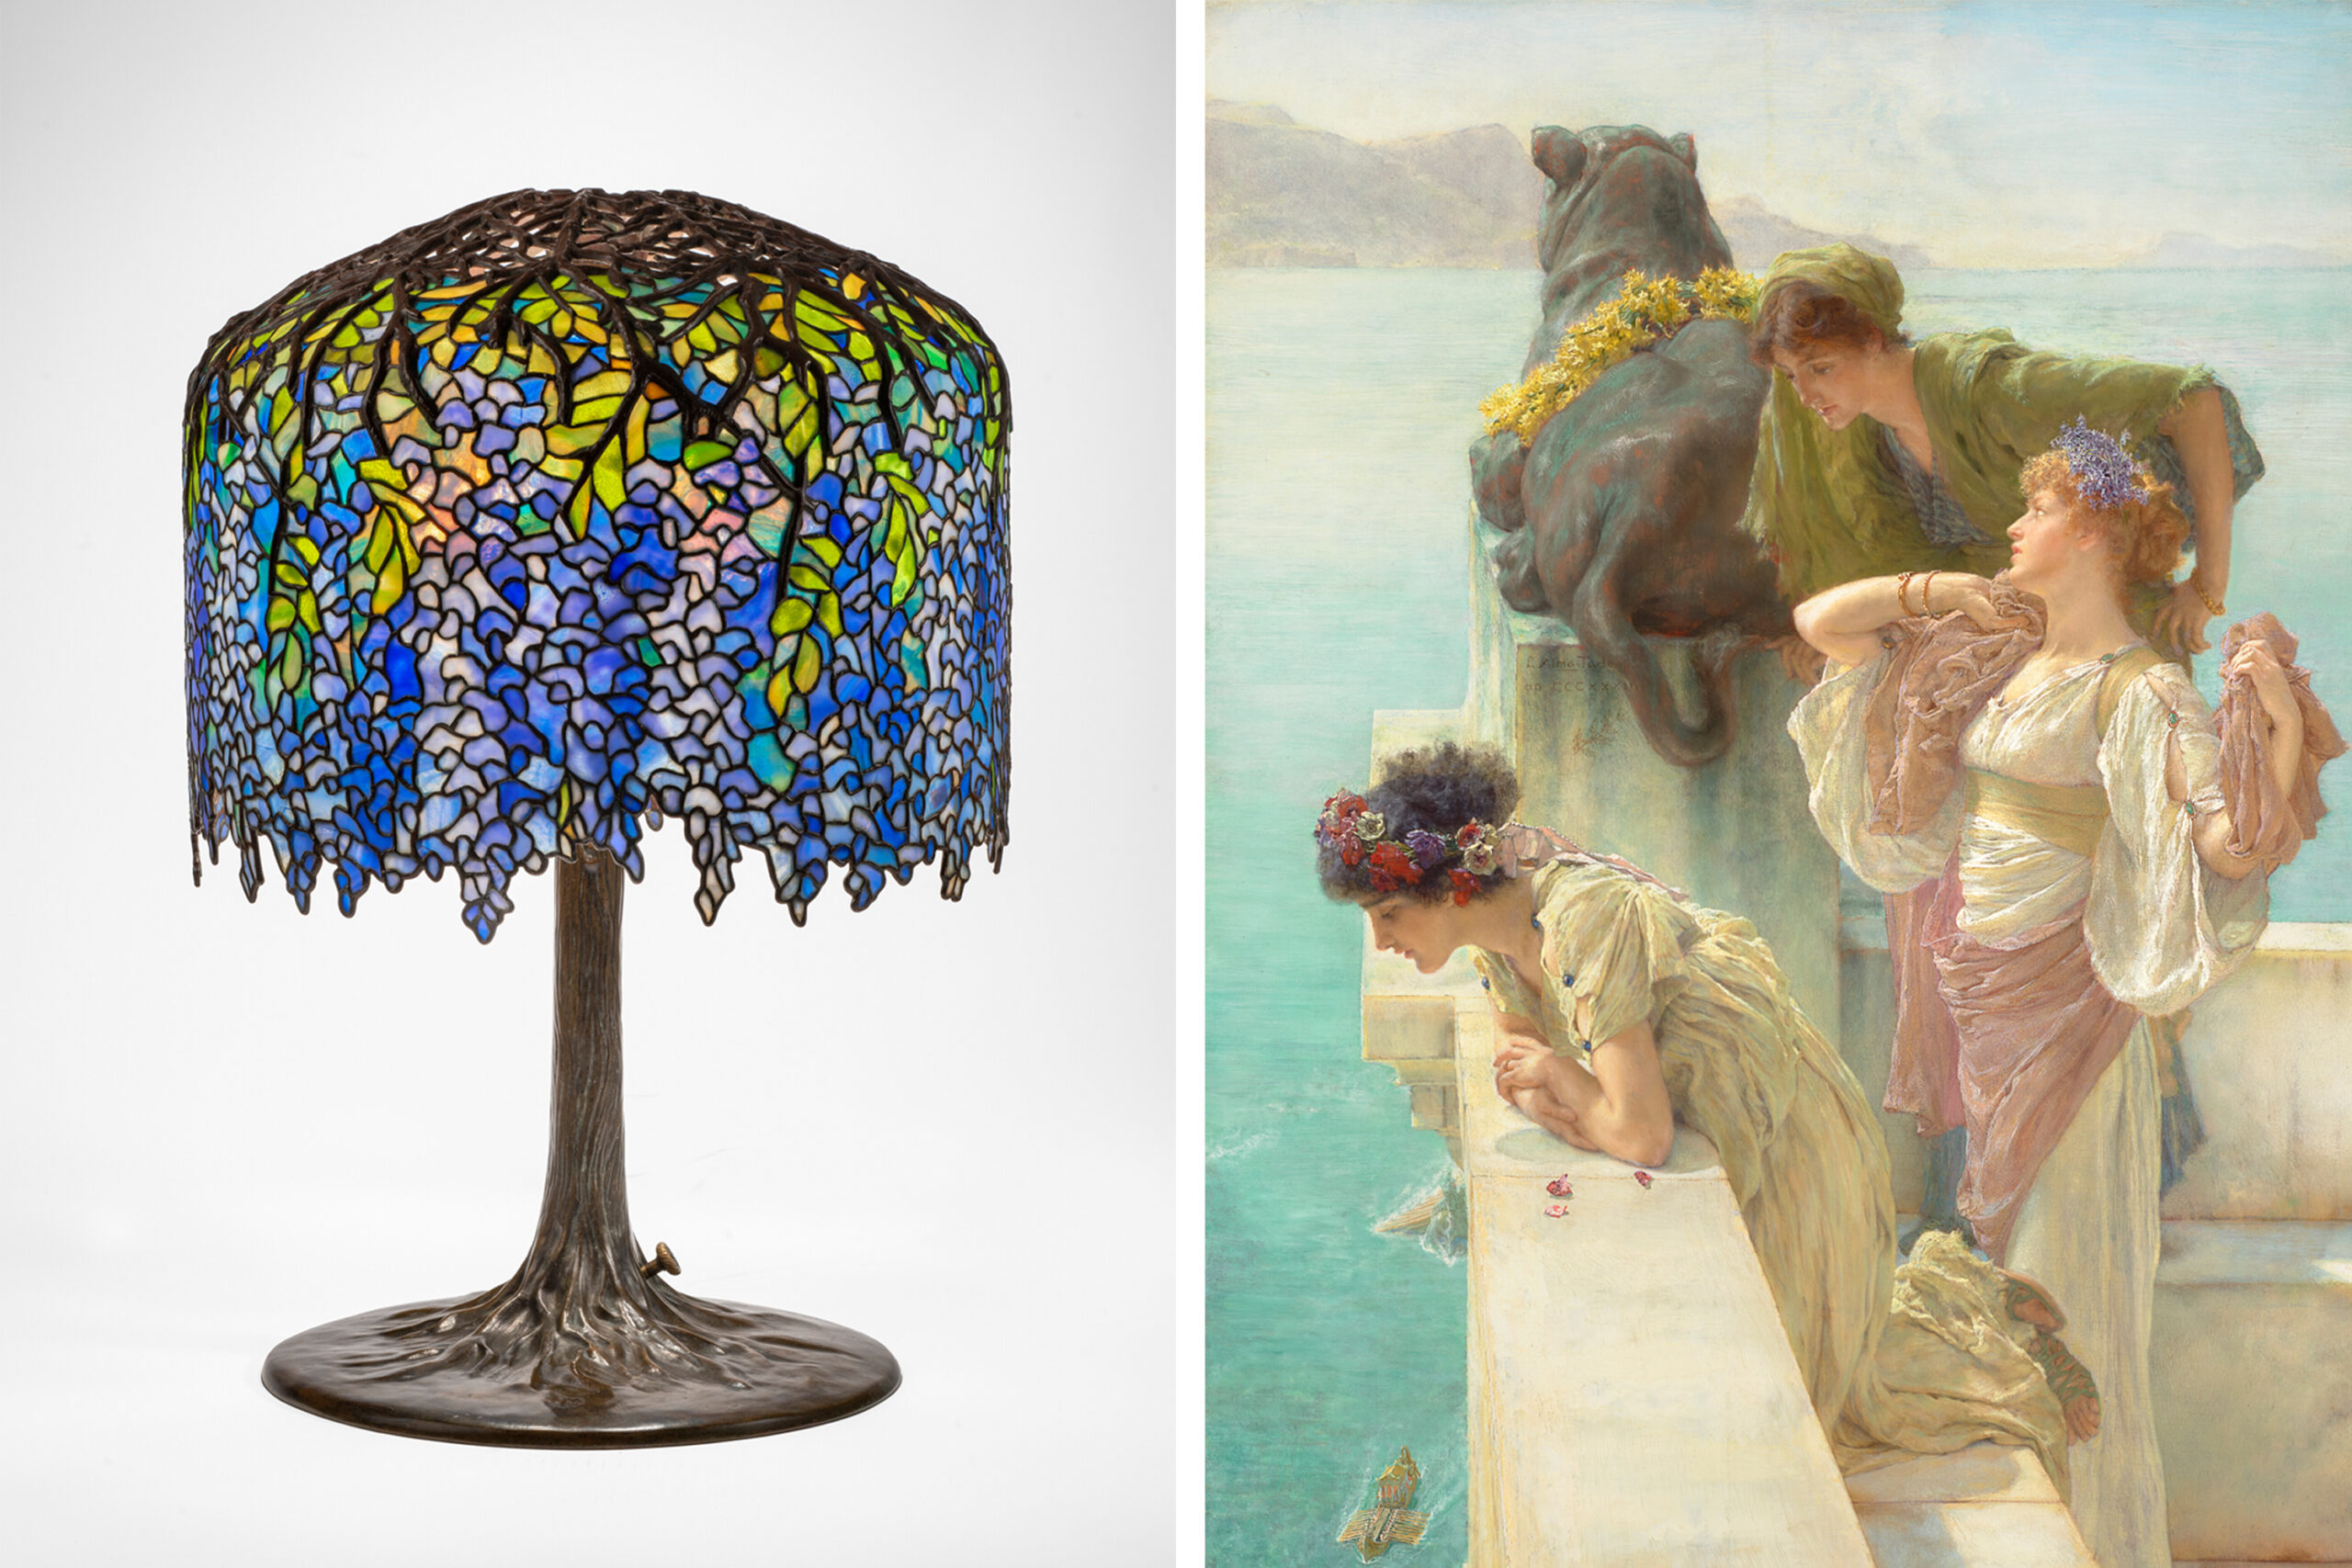 $1M For a Lamp? Items at the Getty Estate Auction Went For Even More